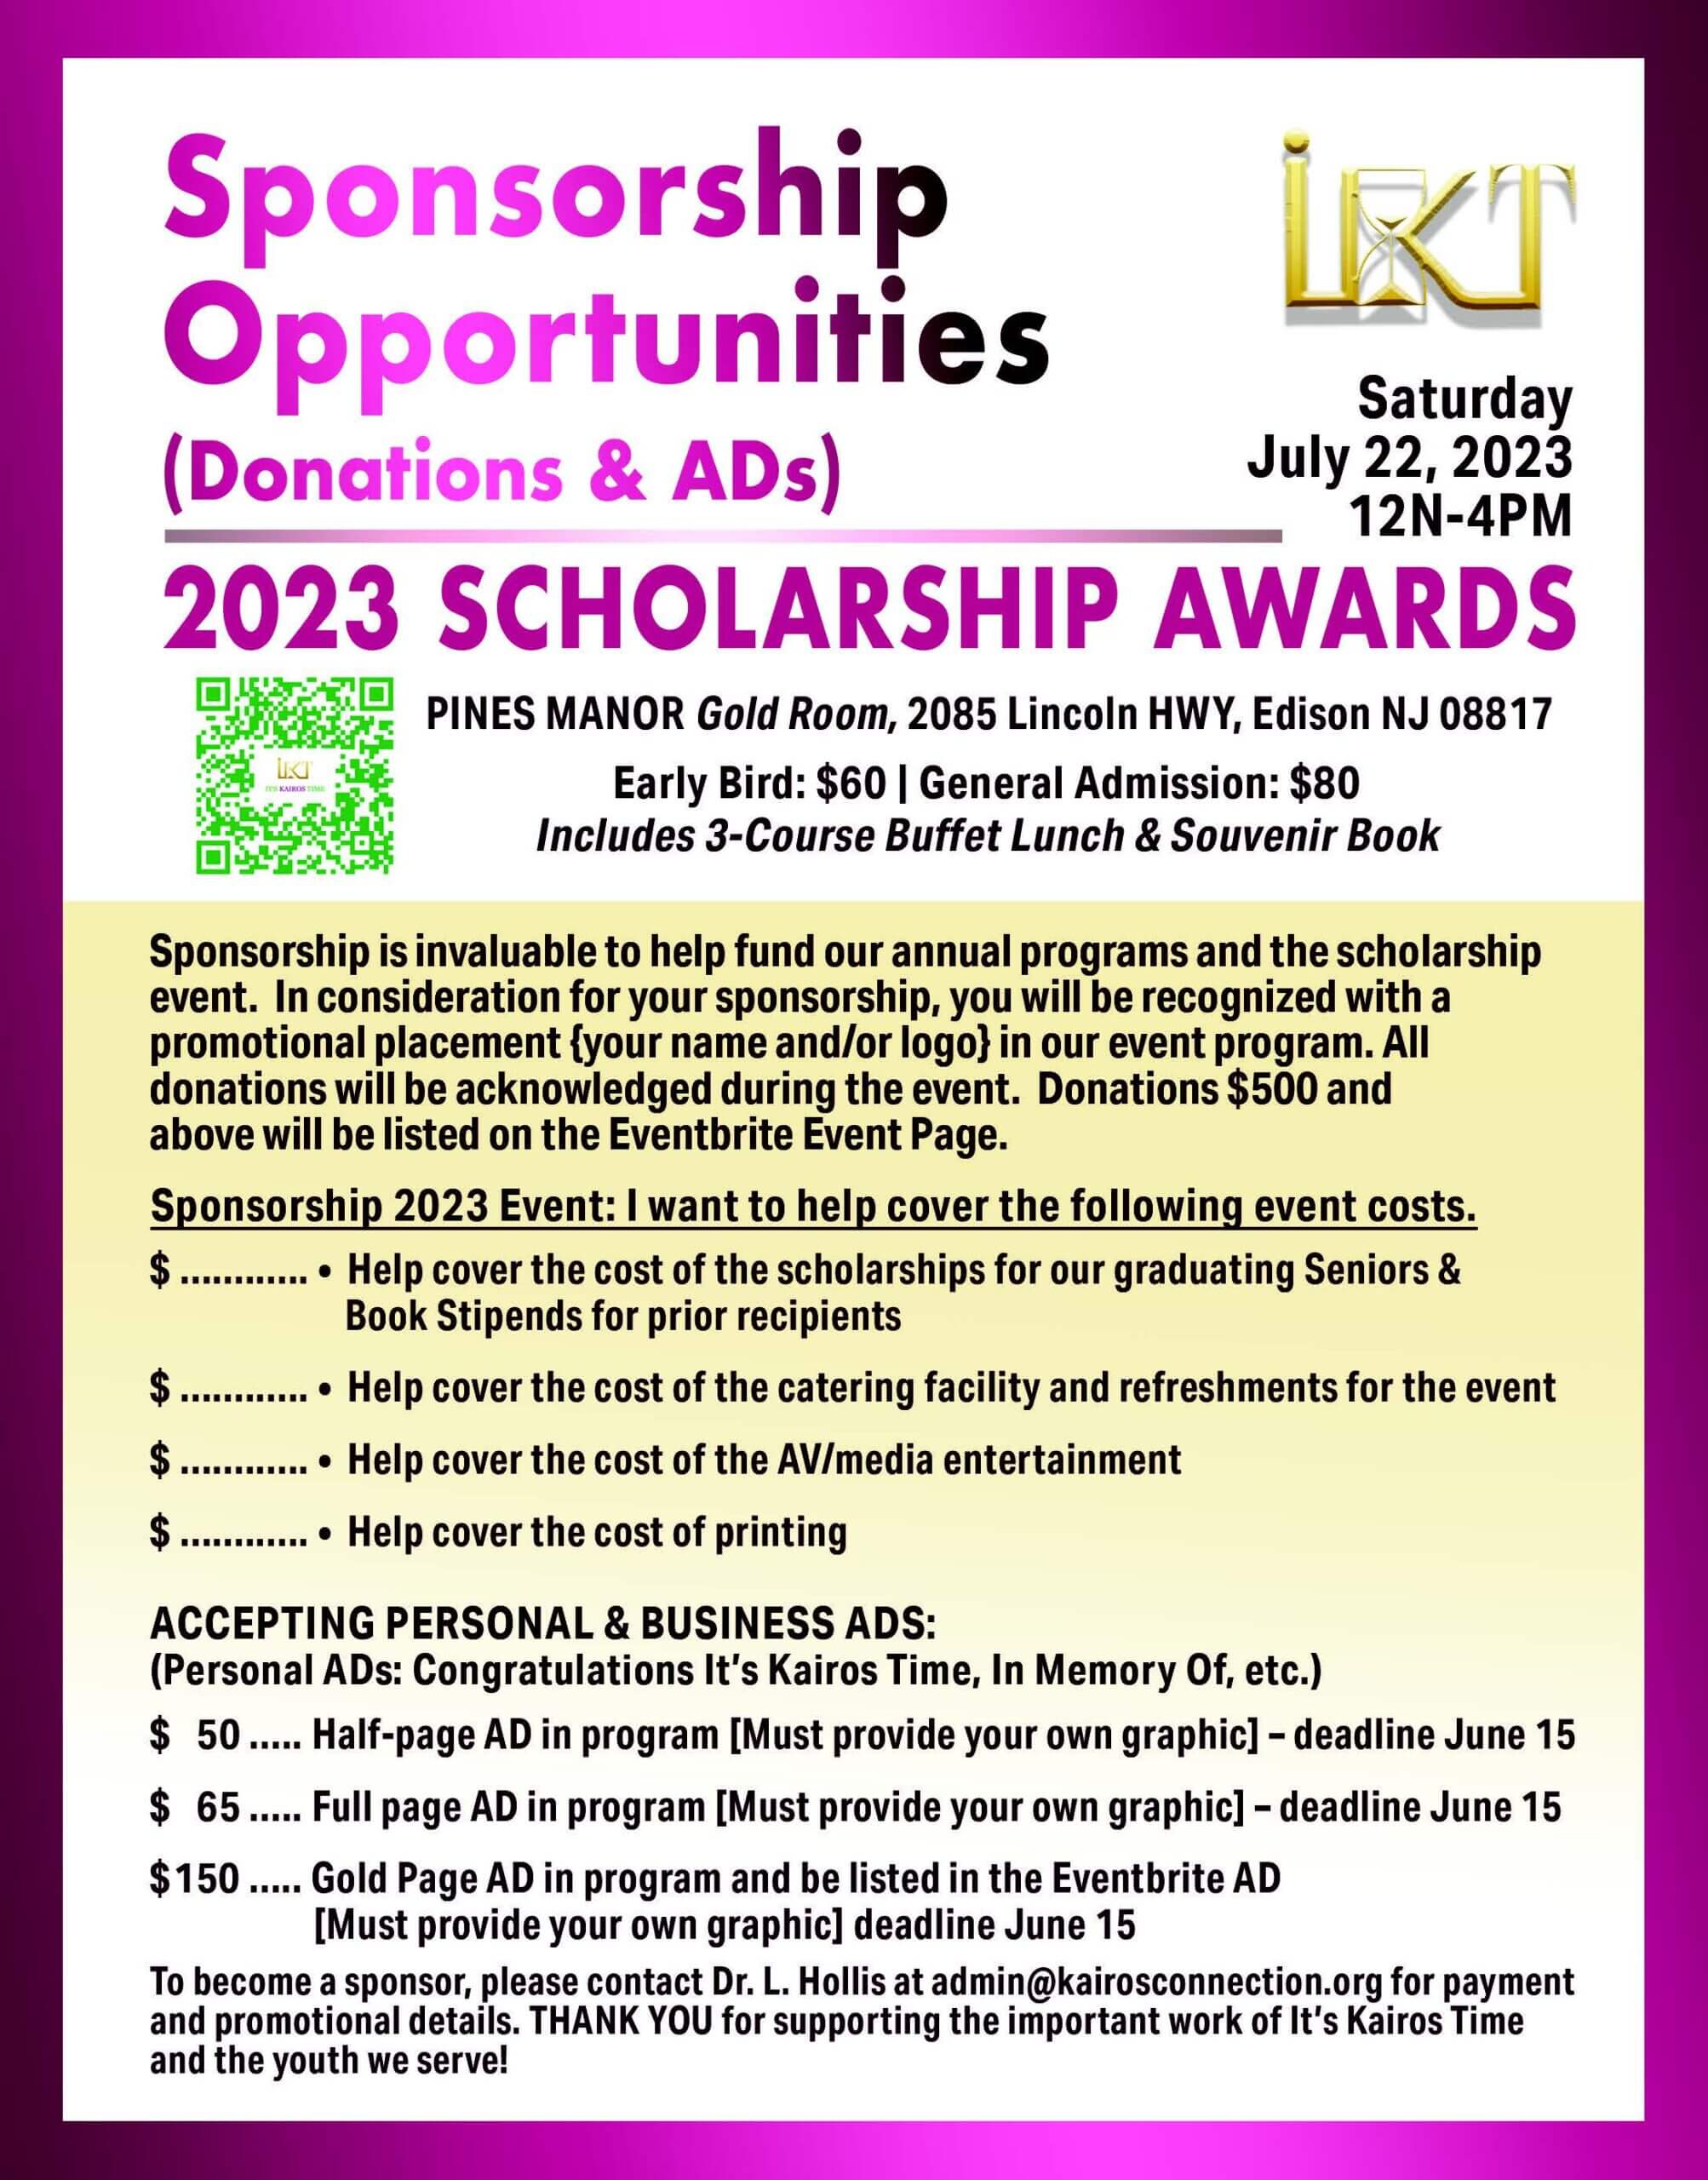 A flyer for the 2 0 2 3 scholarship awards.